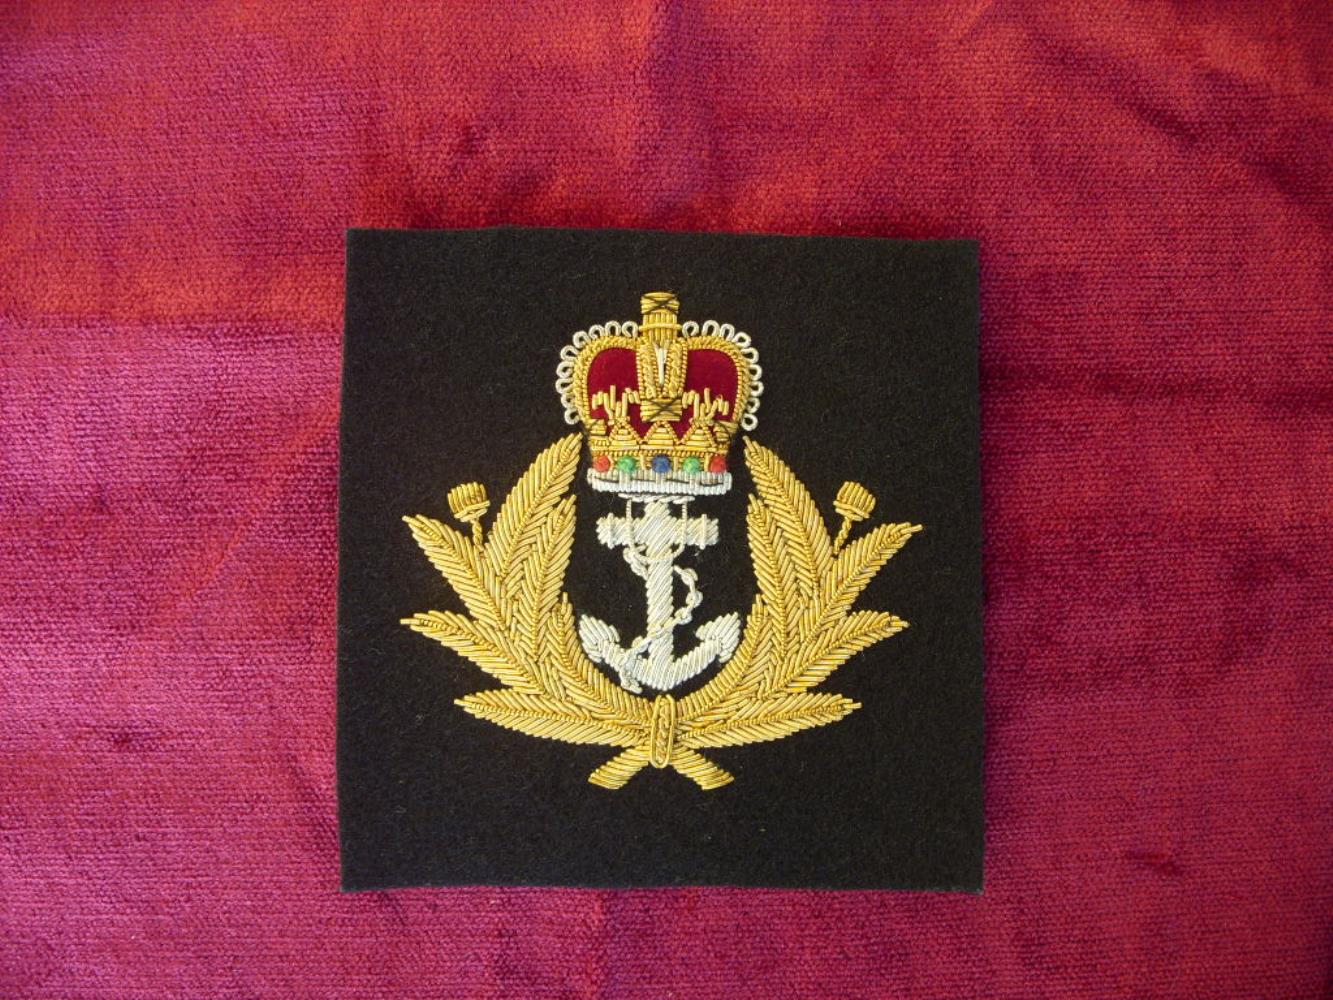 Worcestershire Medal Service: RN Crown Wreath and Anchor Wire Blazer Badge